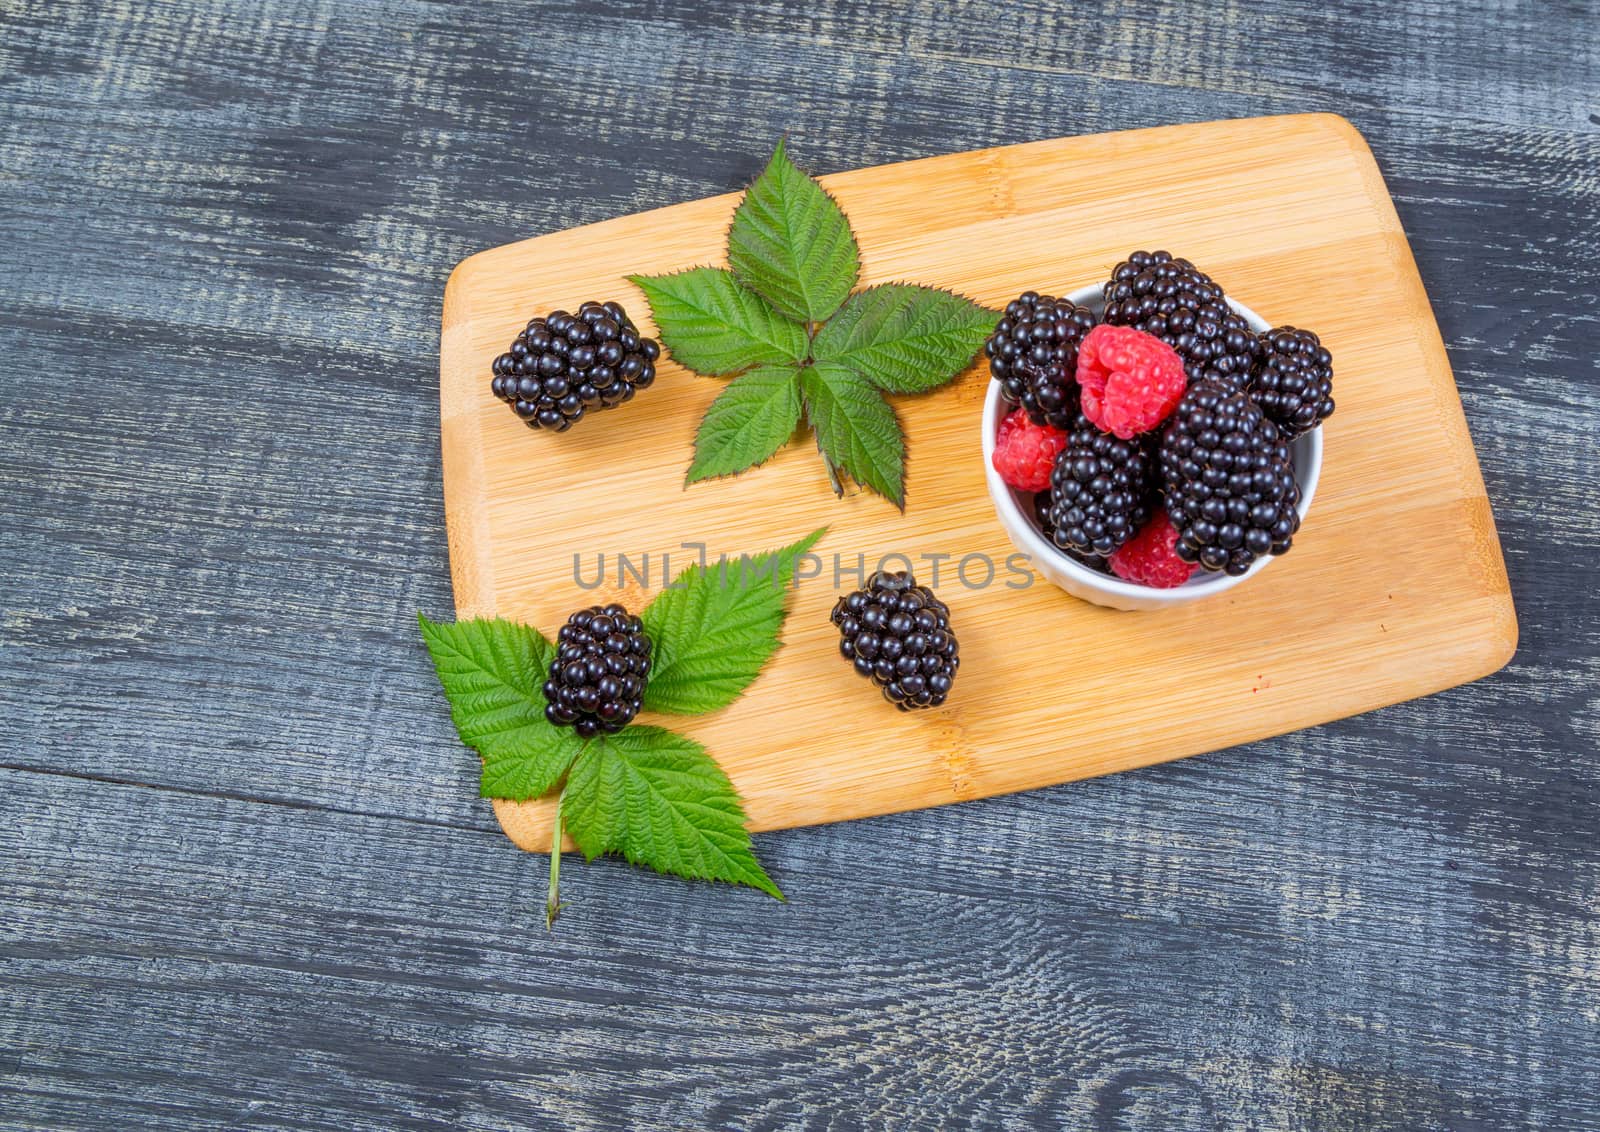 ripe blackberry with leaves on a wooden cutting board in a white ceramic bowl on dark blue wooden background.